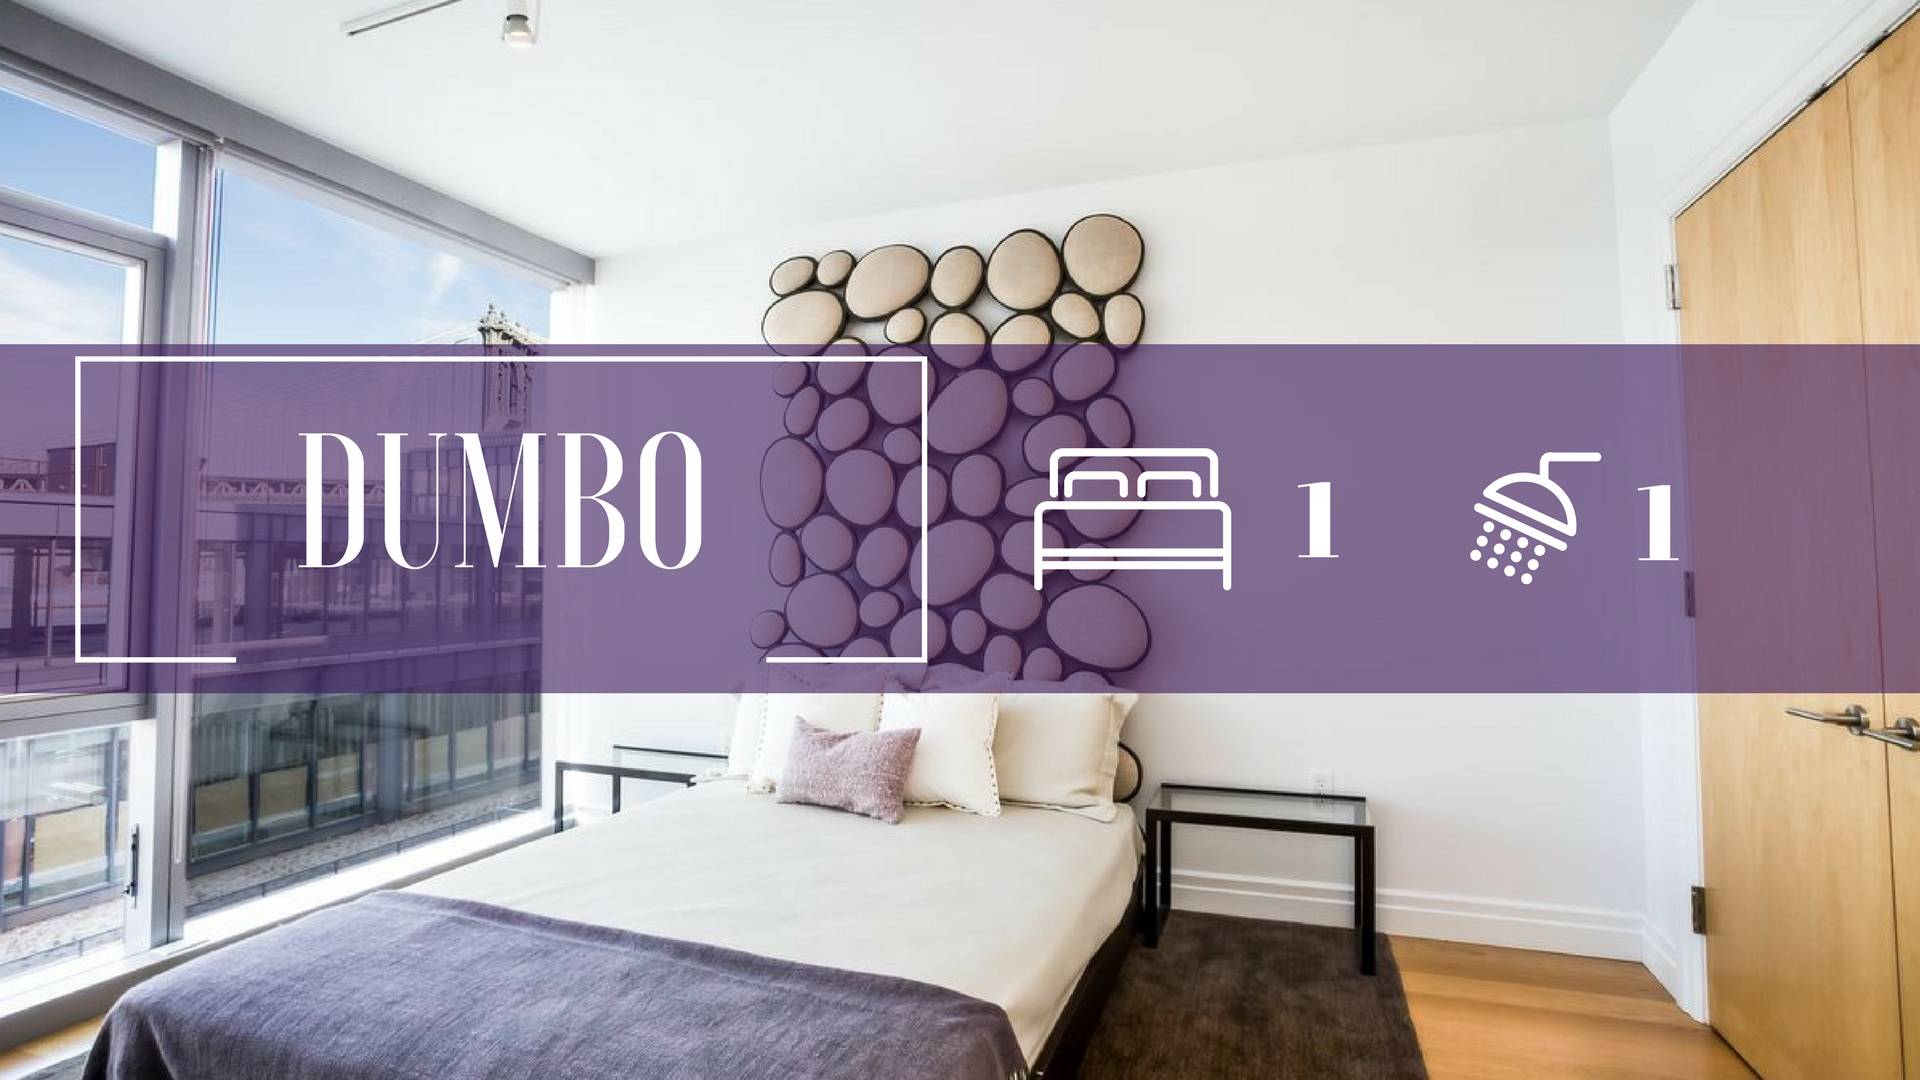 Thinking Of Moving to DUMBO? Check out this One Bedroom with Amazing Bridge Views